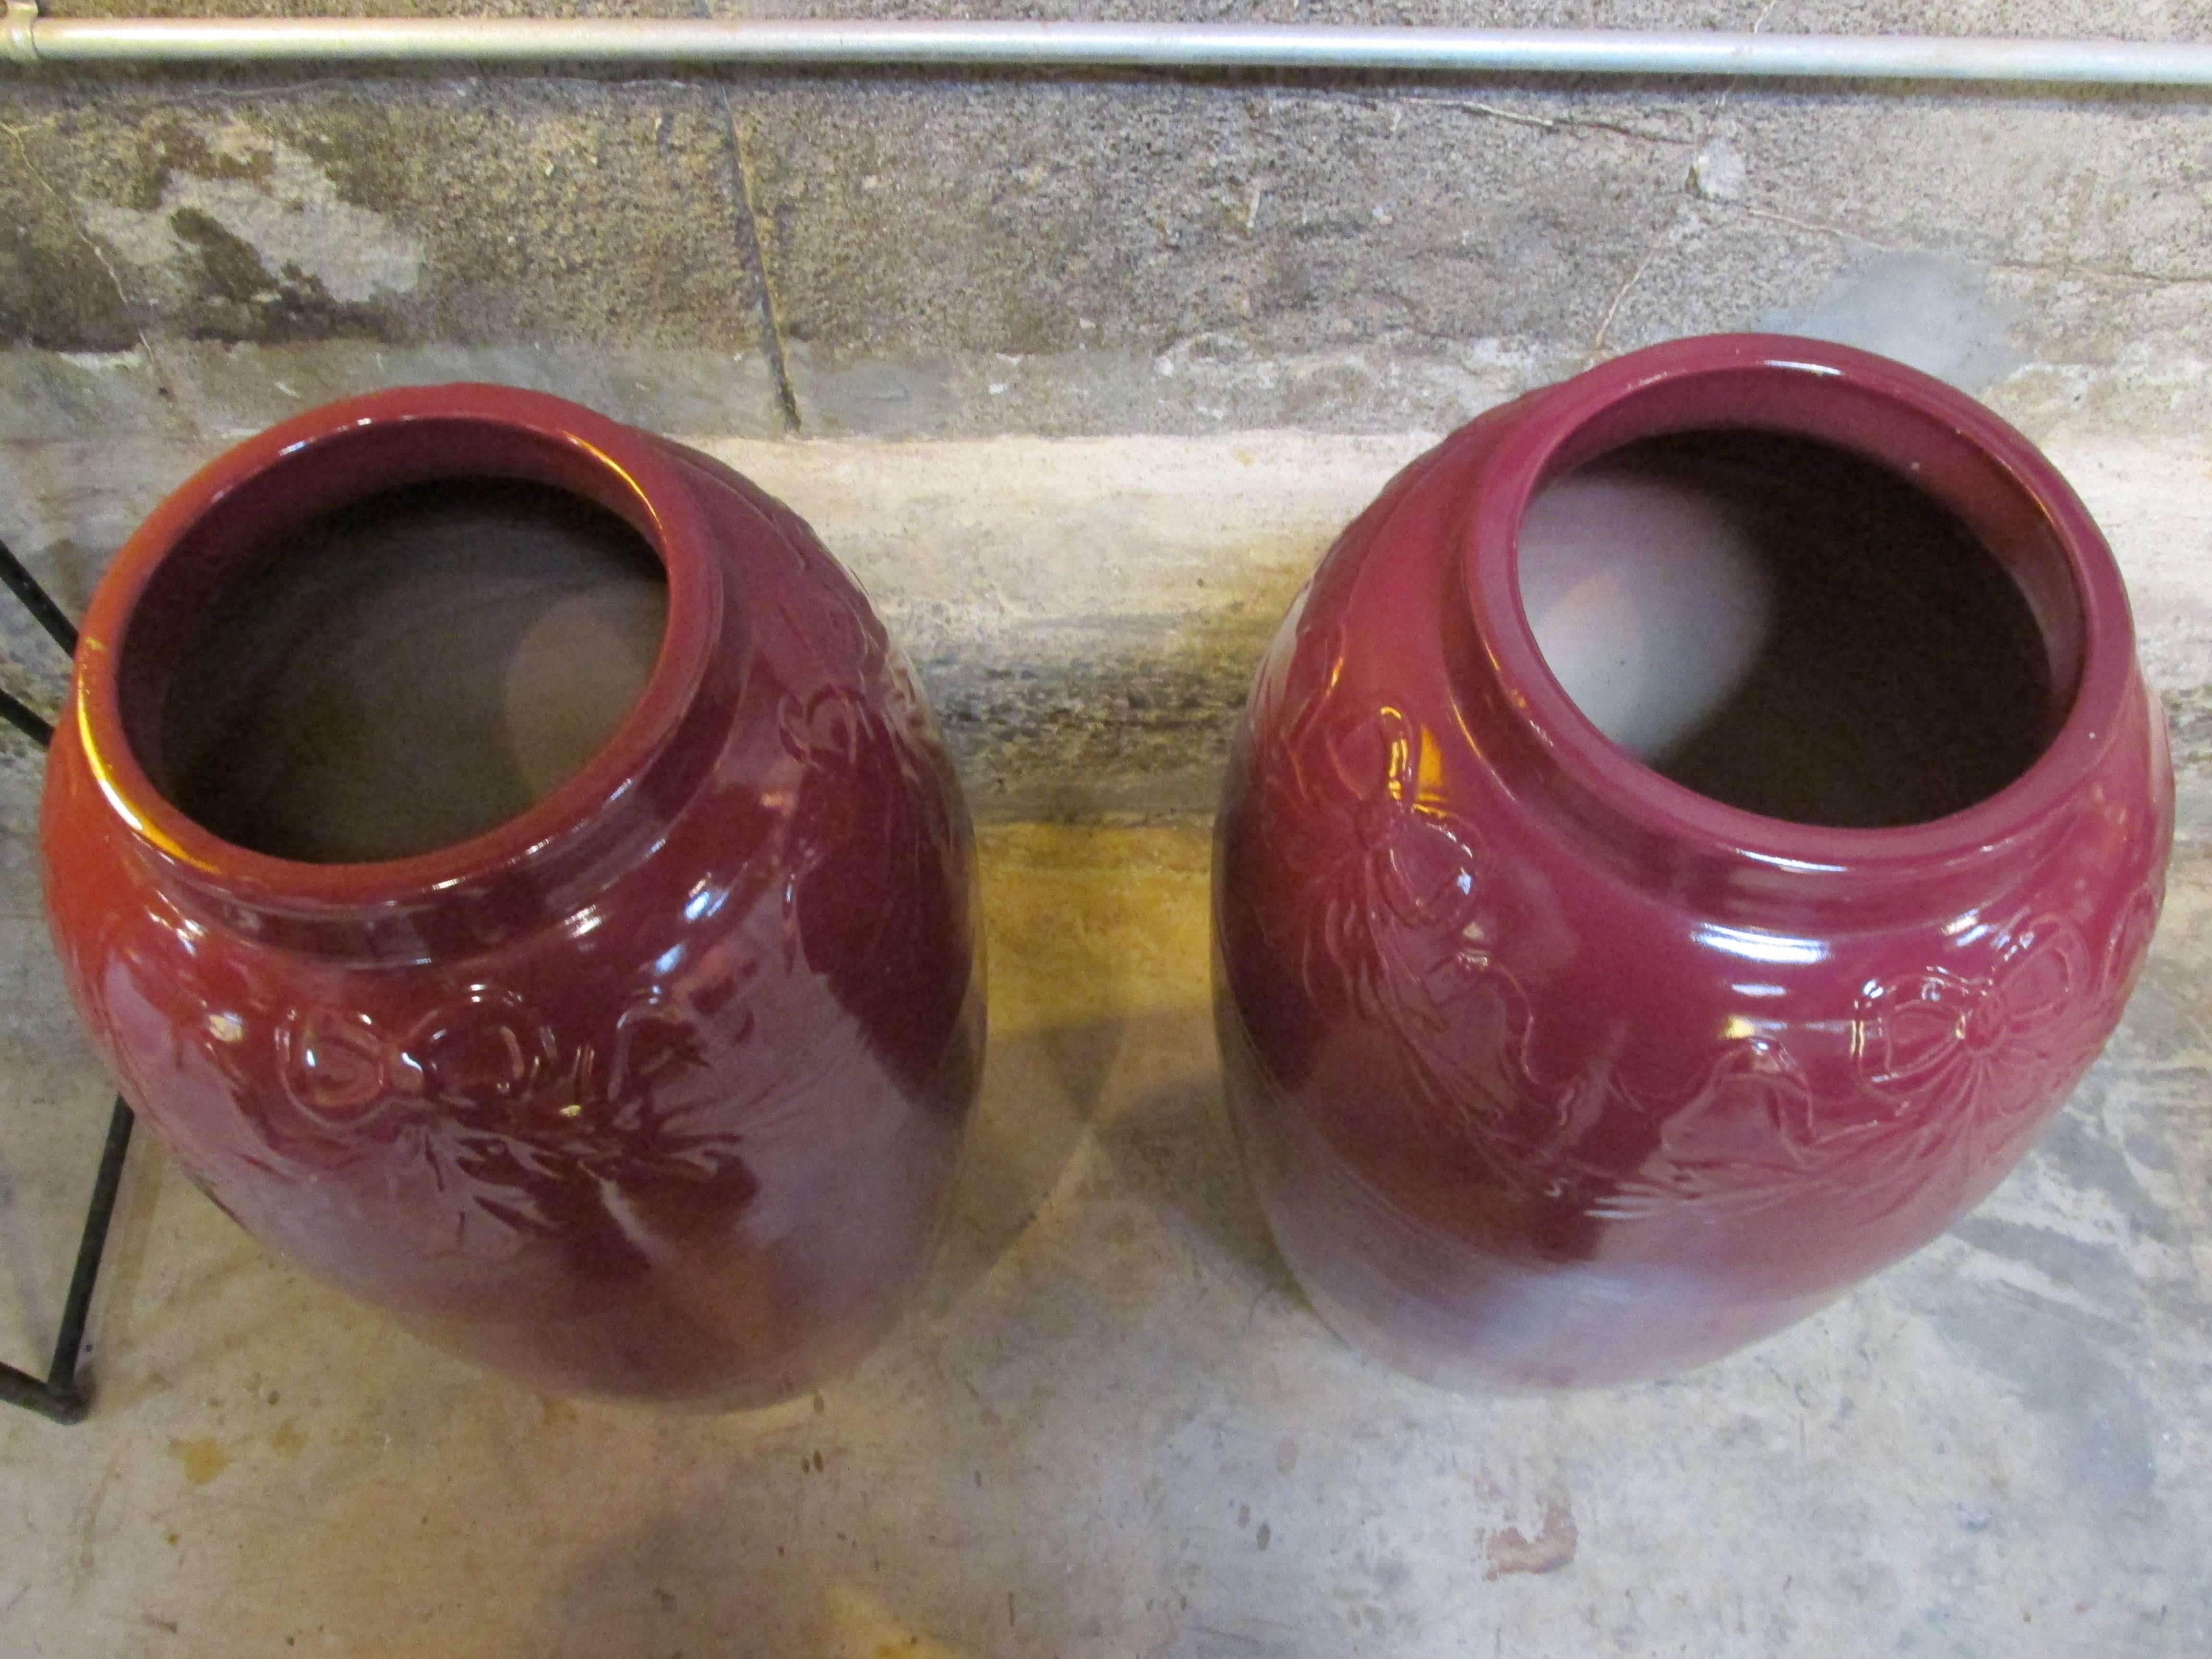 A matched pair of large-scale Mid-Century Modern pottery floor pots or oil jars with a garland and ribbon relief design. Excellent original condition. Beautiful addition to your garden, but may be enjoyed as an interior or exterior decorative